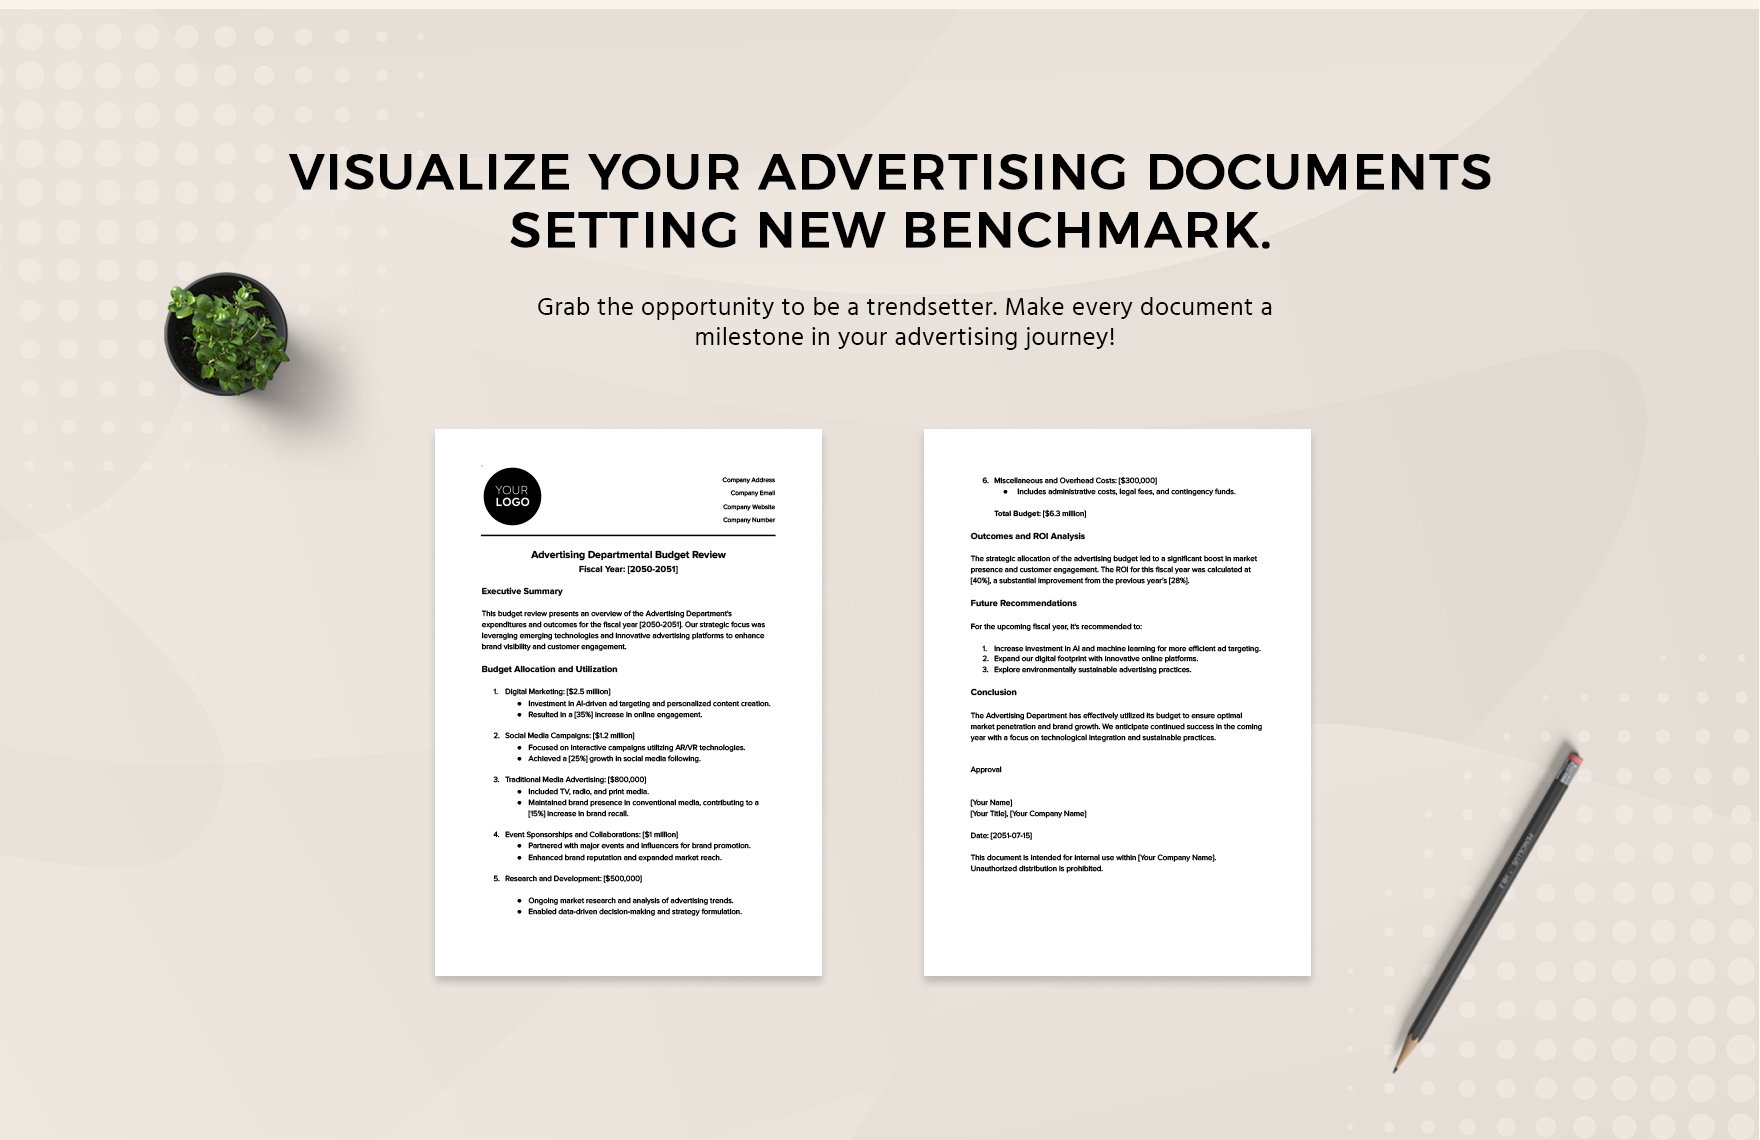 Advertising Departmental Budget Review Template